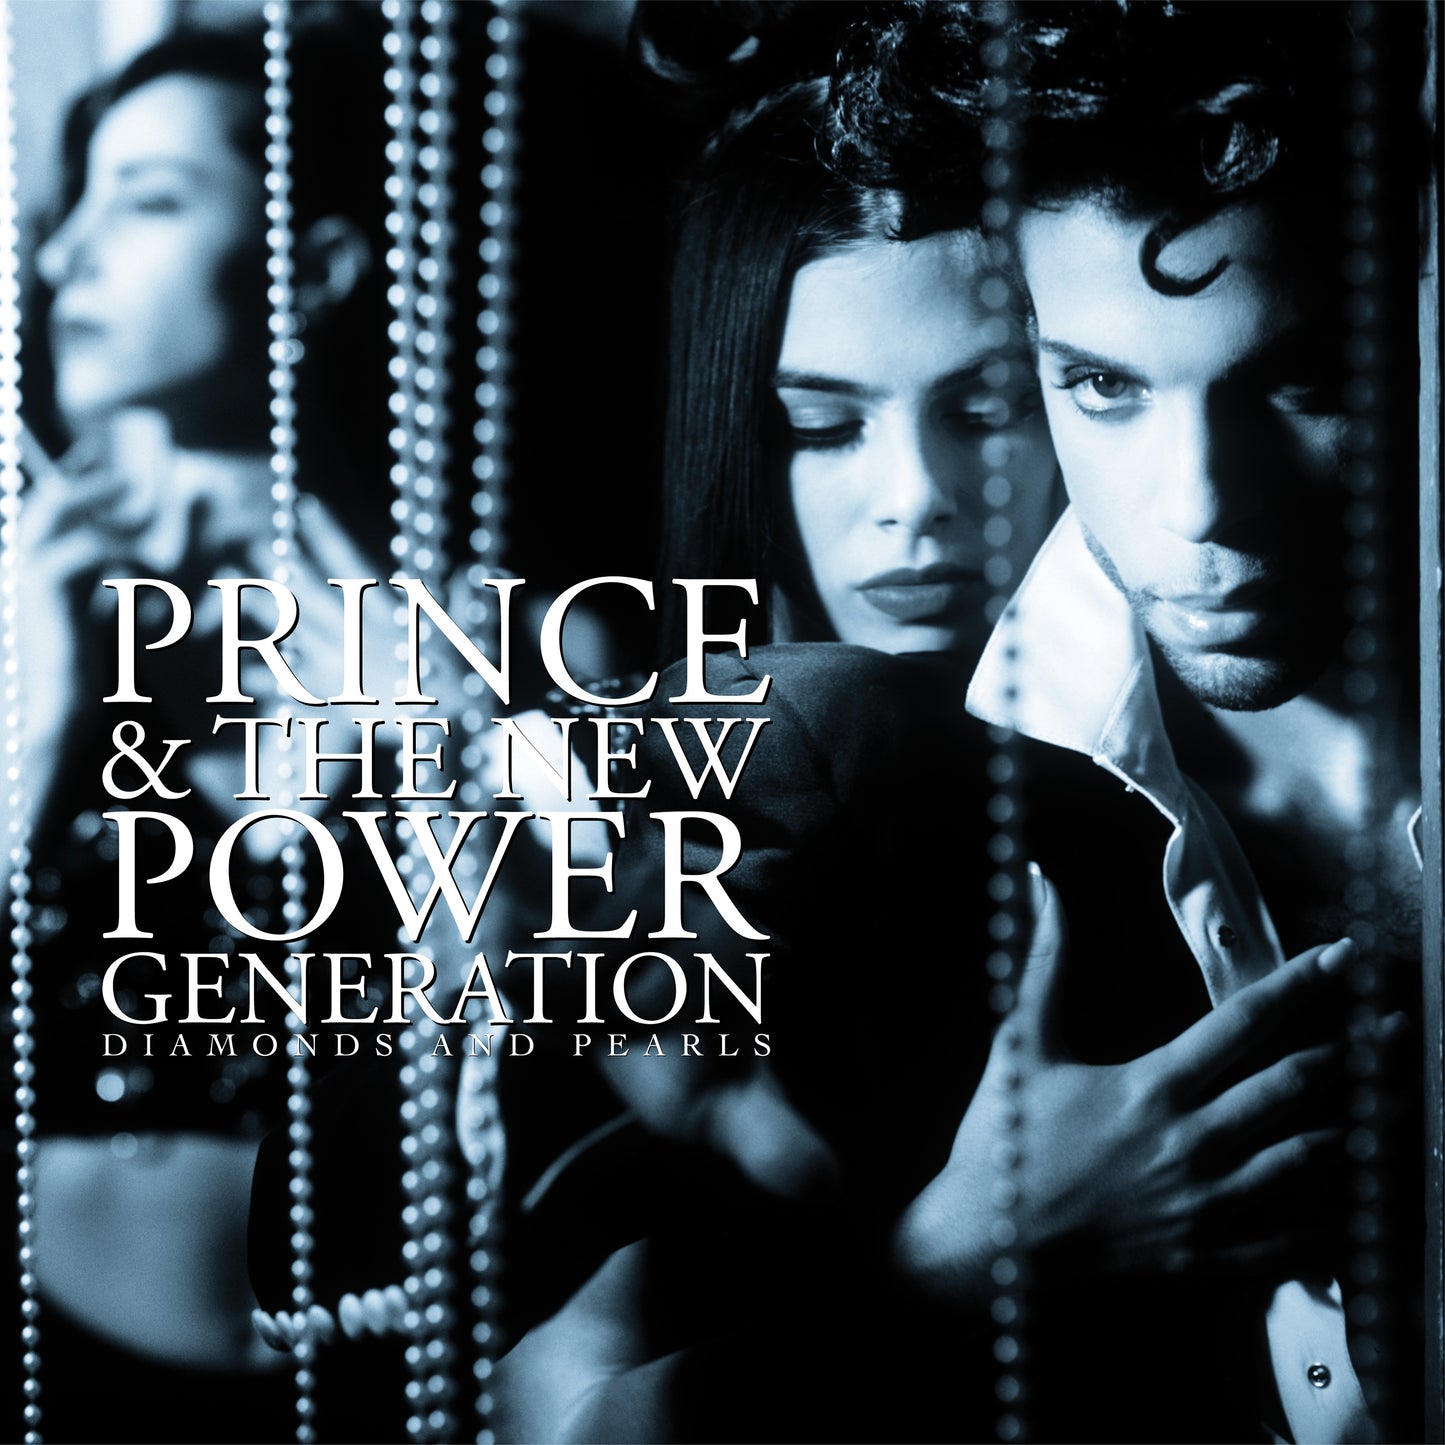 Prince & The New Power Generation - Diamonds and Pearls Super Deluxe Edition